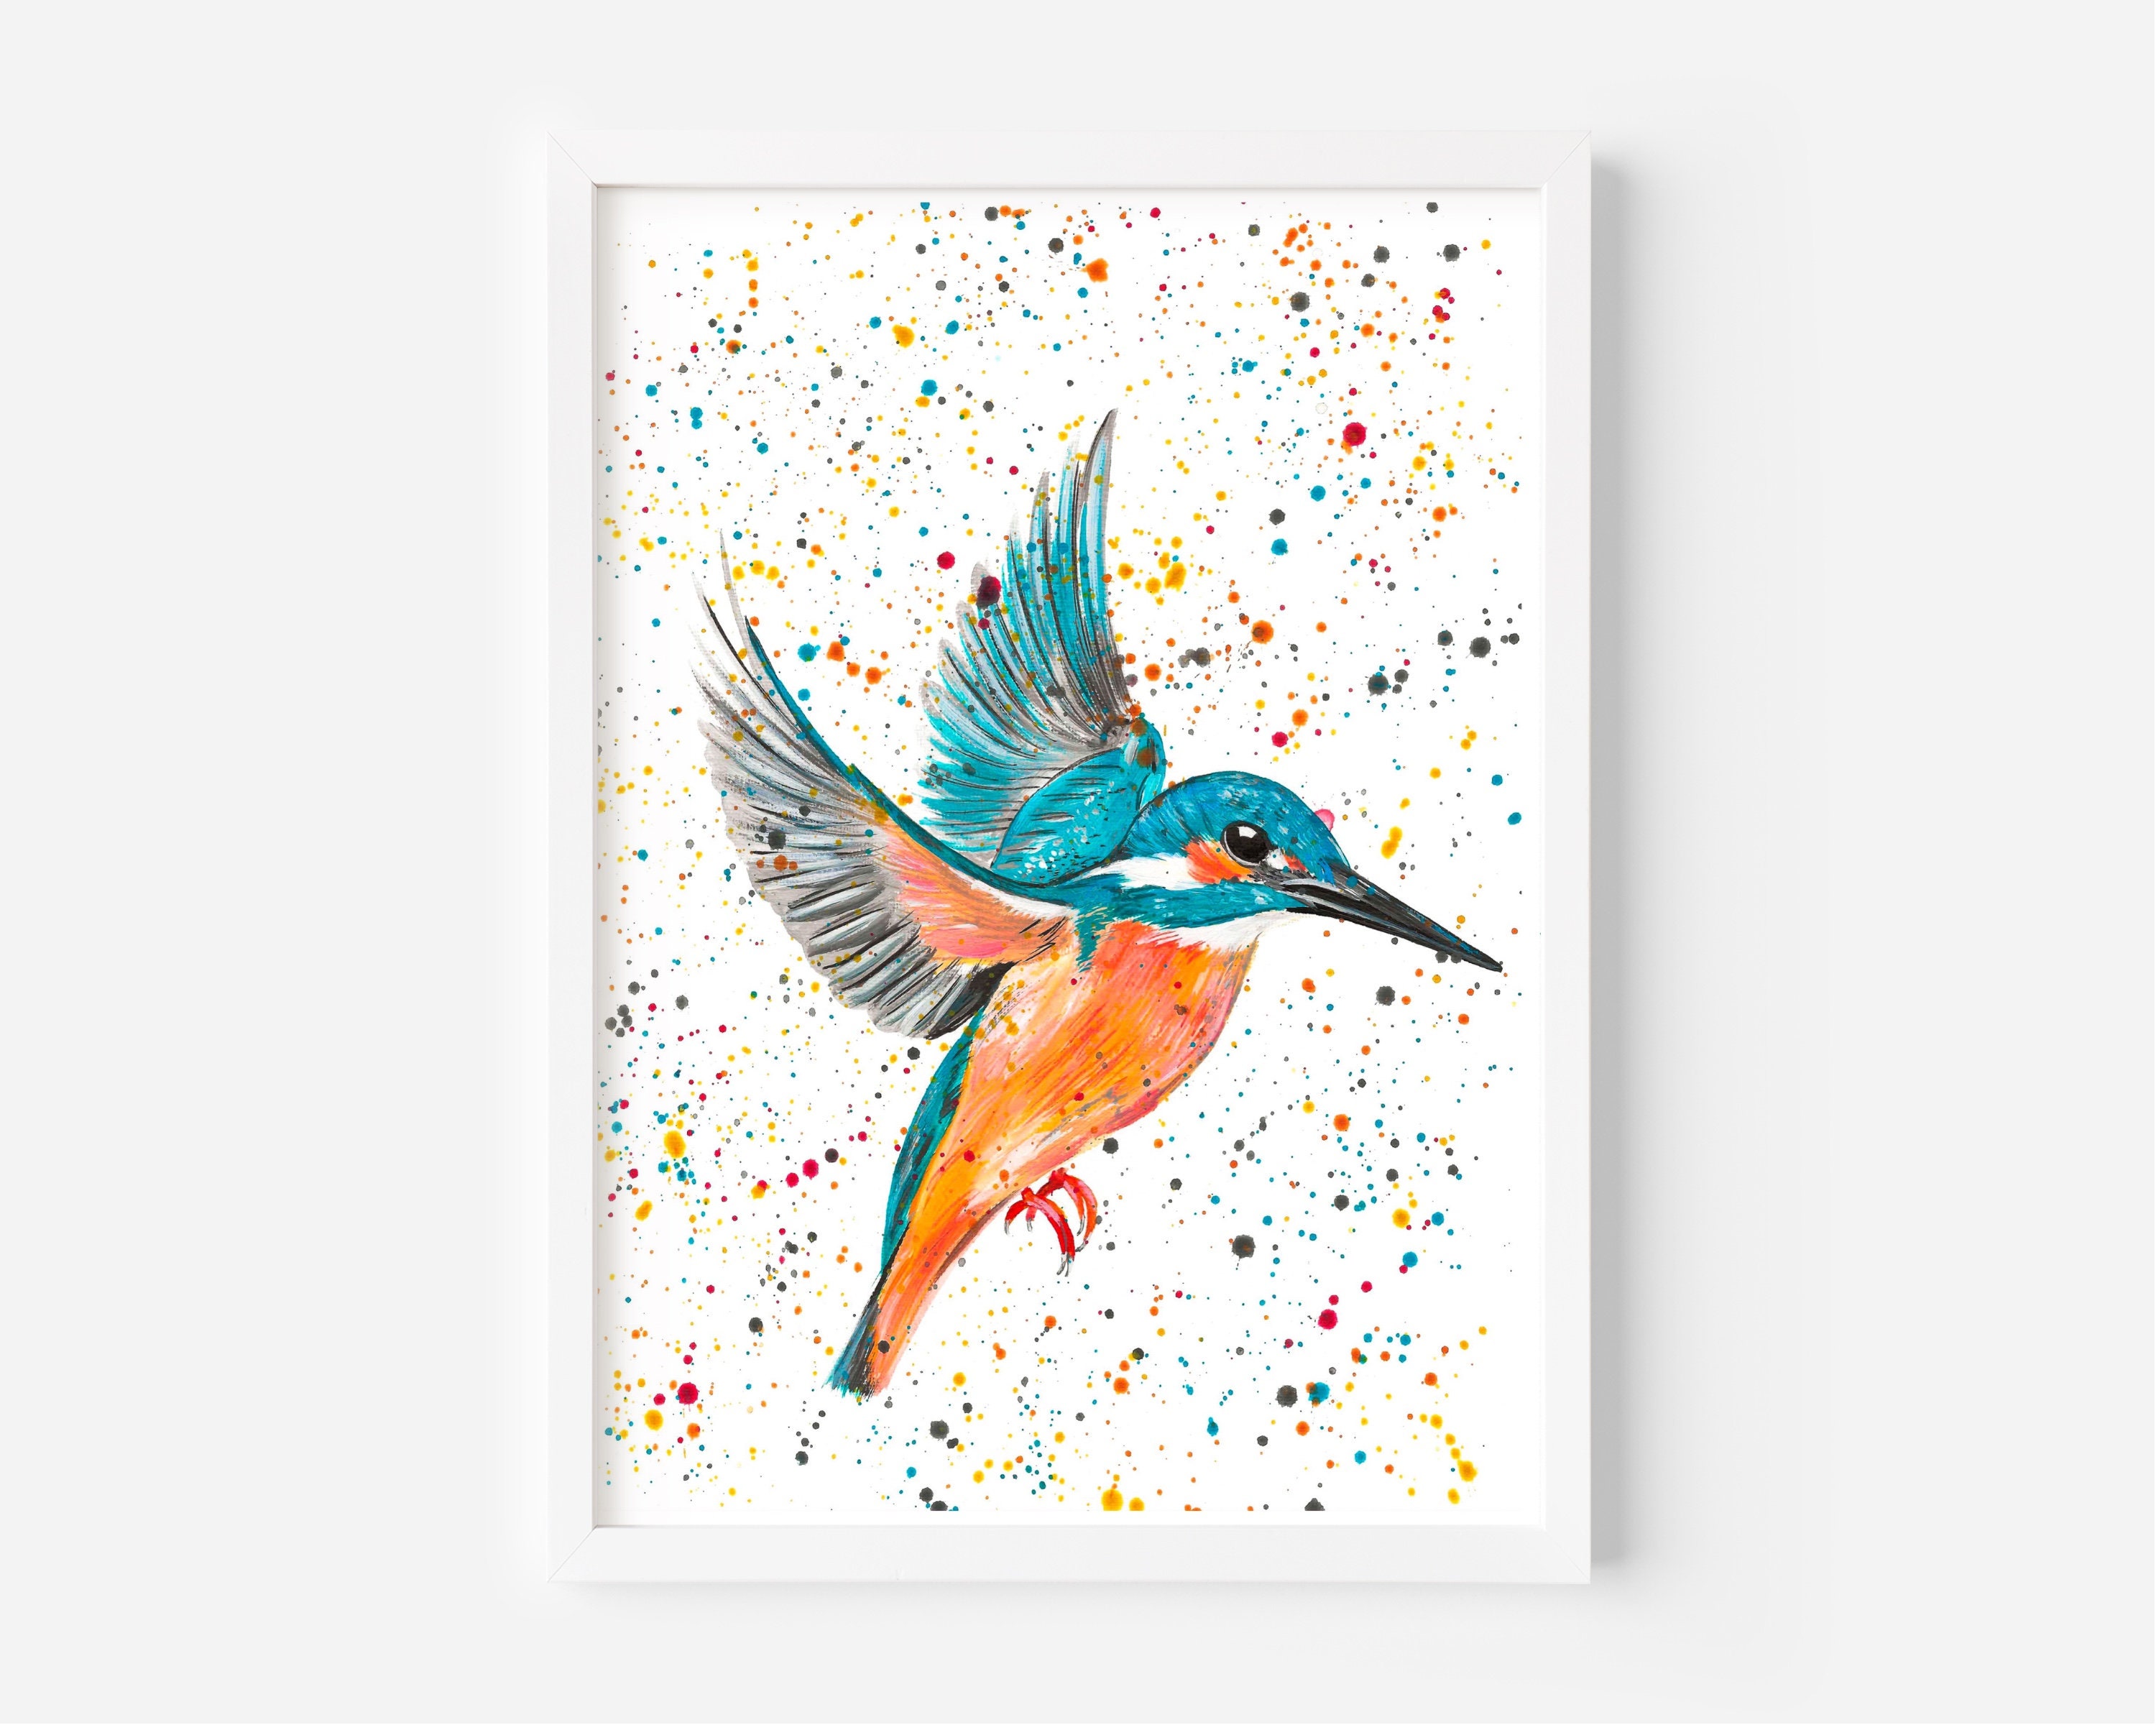 Kingfisher Time Lapse Painting Video - Bird Watercolor Painting, Loose –  Crafty Cow Design